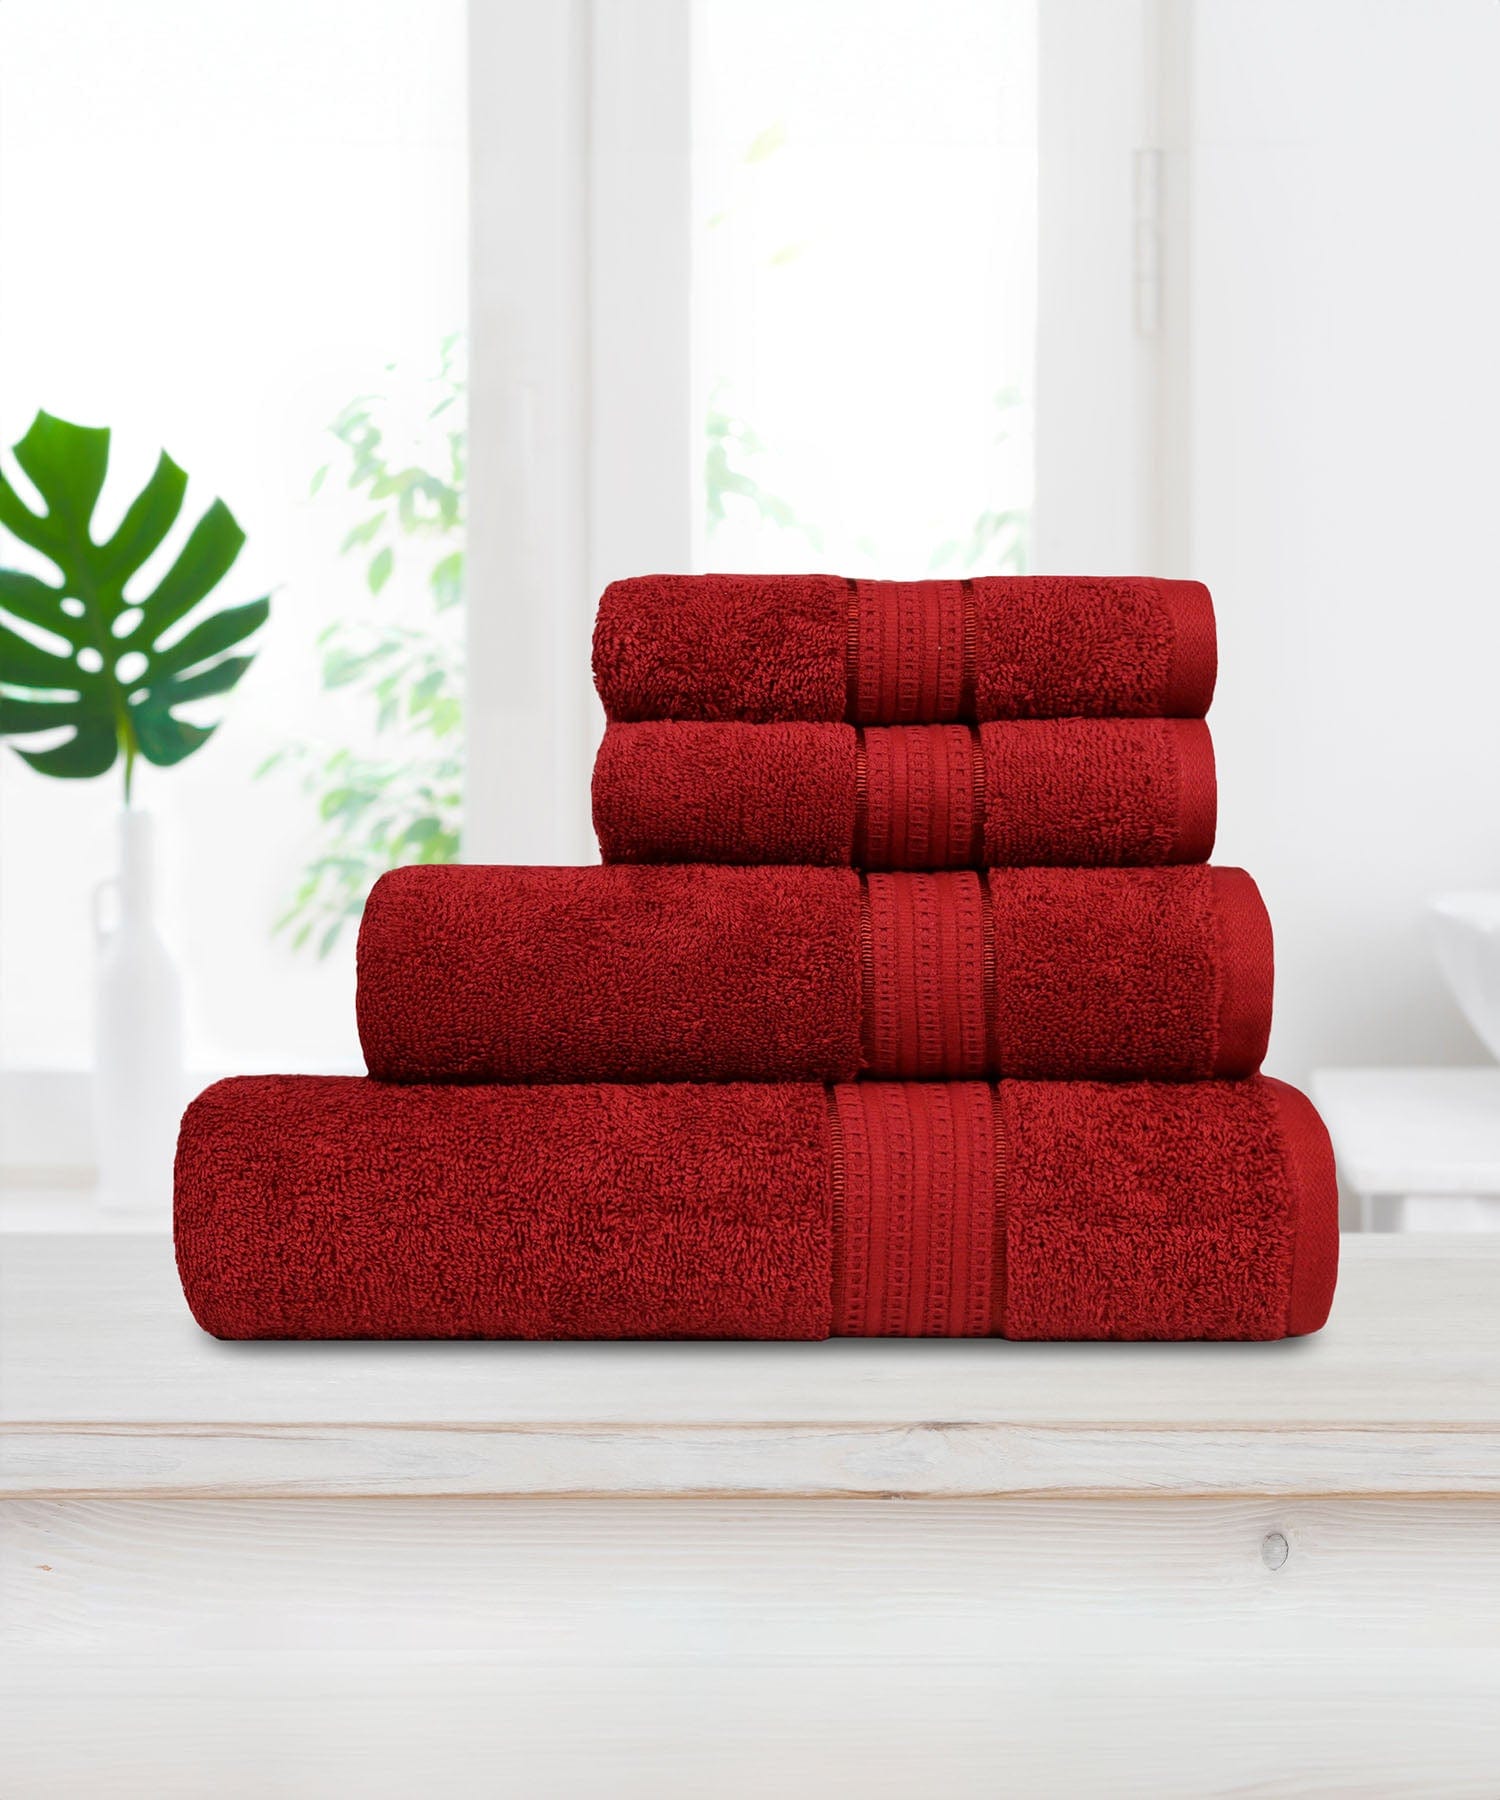 400 GSM , CARNIVAL TOWEL,100% Cotton,Durable,Super Soft, LOVELY RED